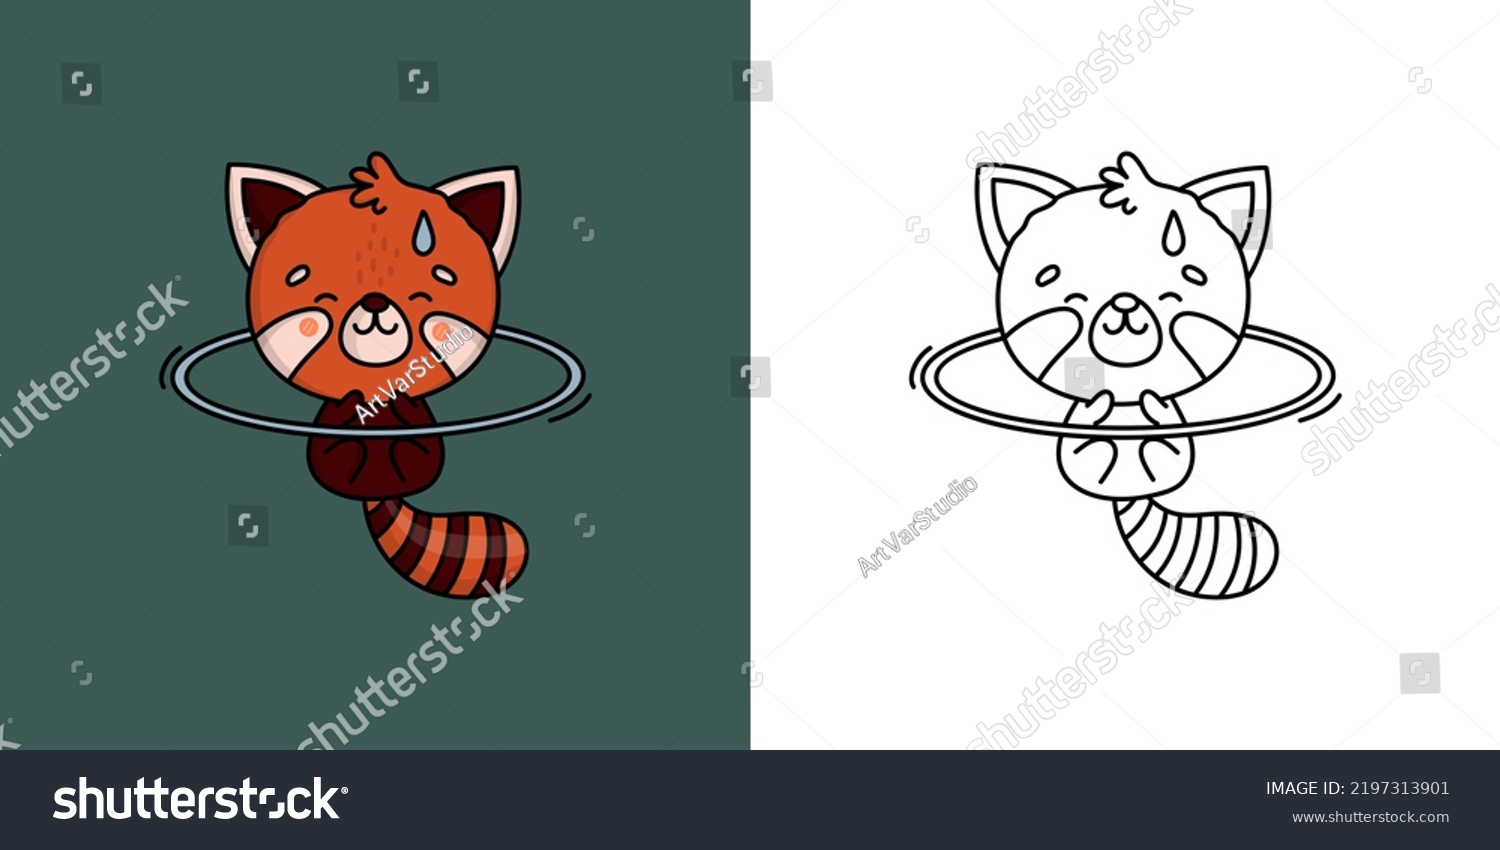 SVG of Kawaii Clipart Red Panda Sportsman Illustration and For Coloring Page. Funny Animal Sportsman. Vector Illustration of a Kawaii Animal for Stickers, Baby Shower, Coloring Pages, Prints for Clothes.
 svg